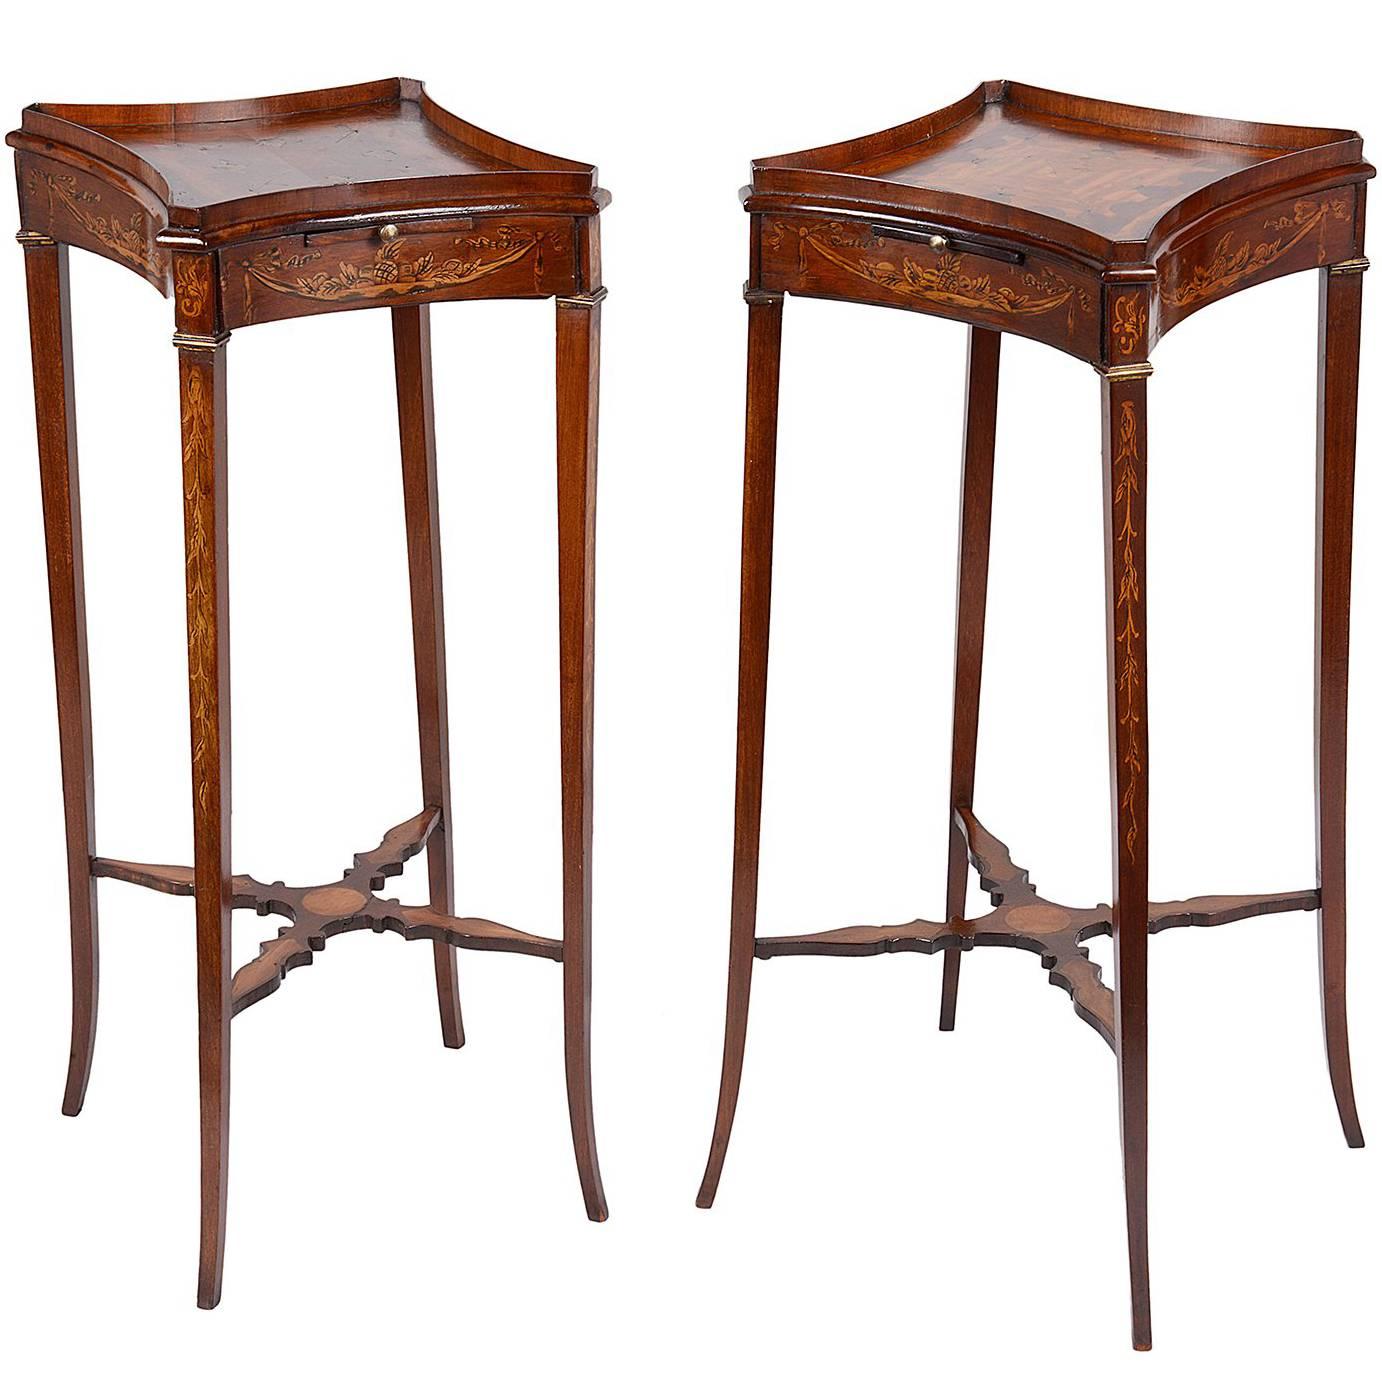 Pair of Sheraton Revival Urn Stands, circa 1880